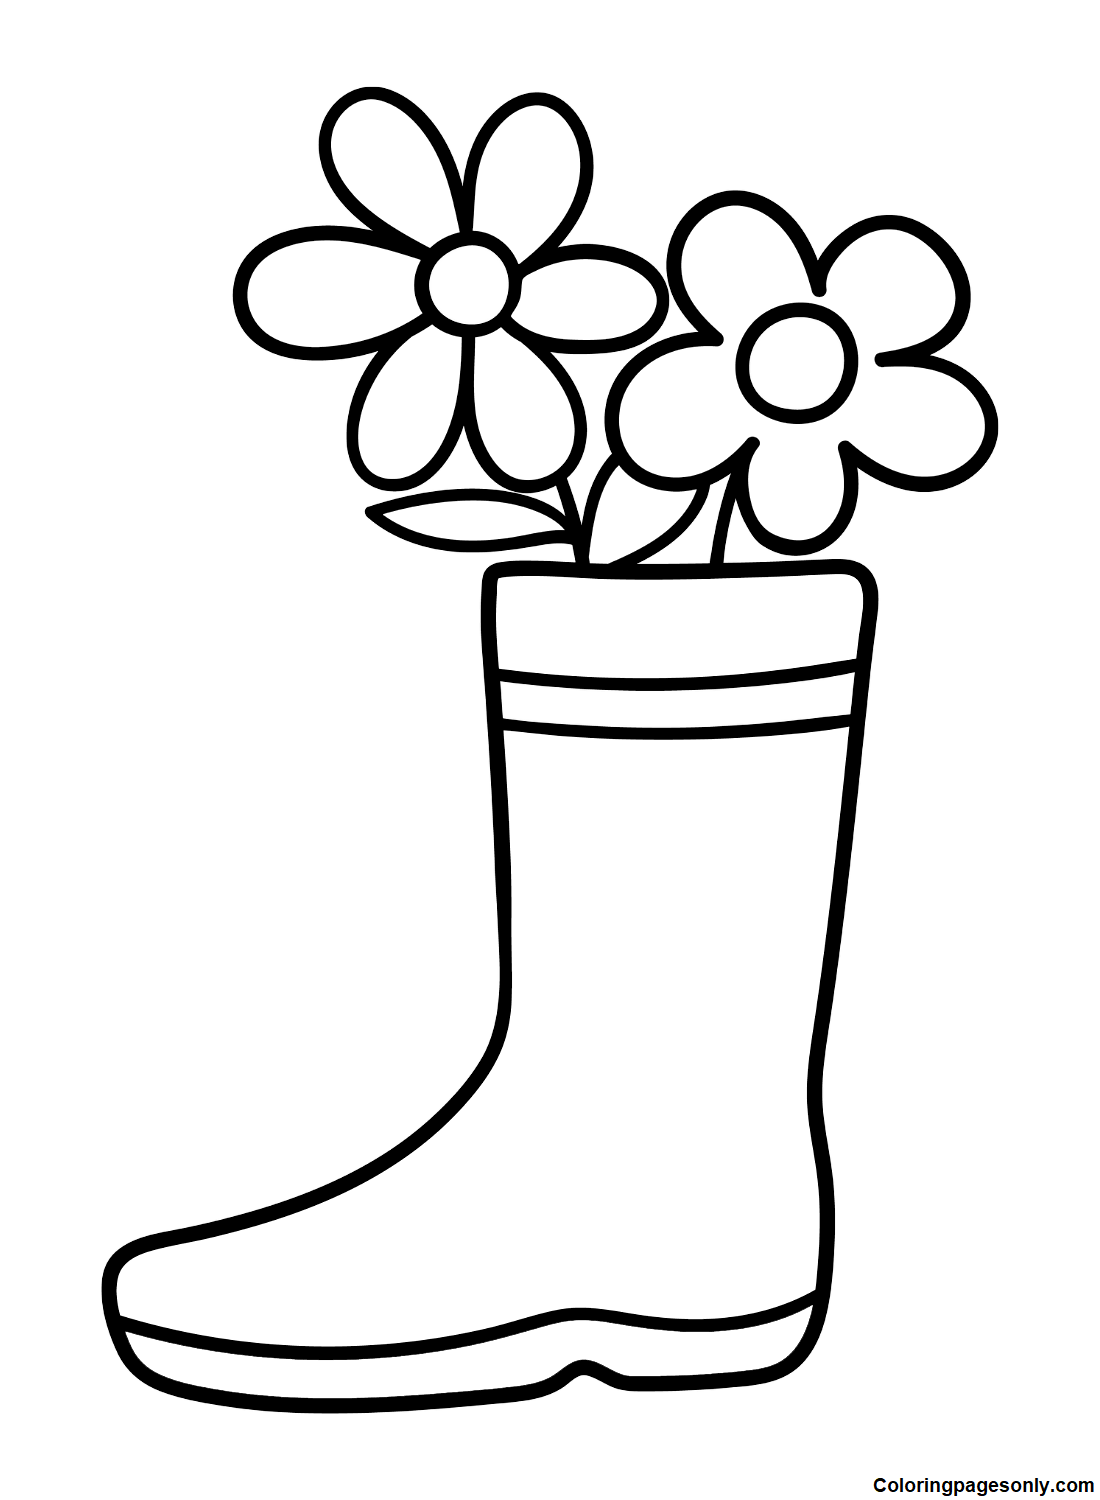 Boots with Flowers Coloring Page